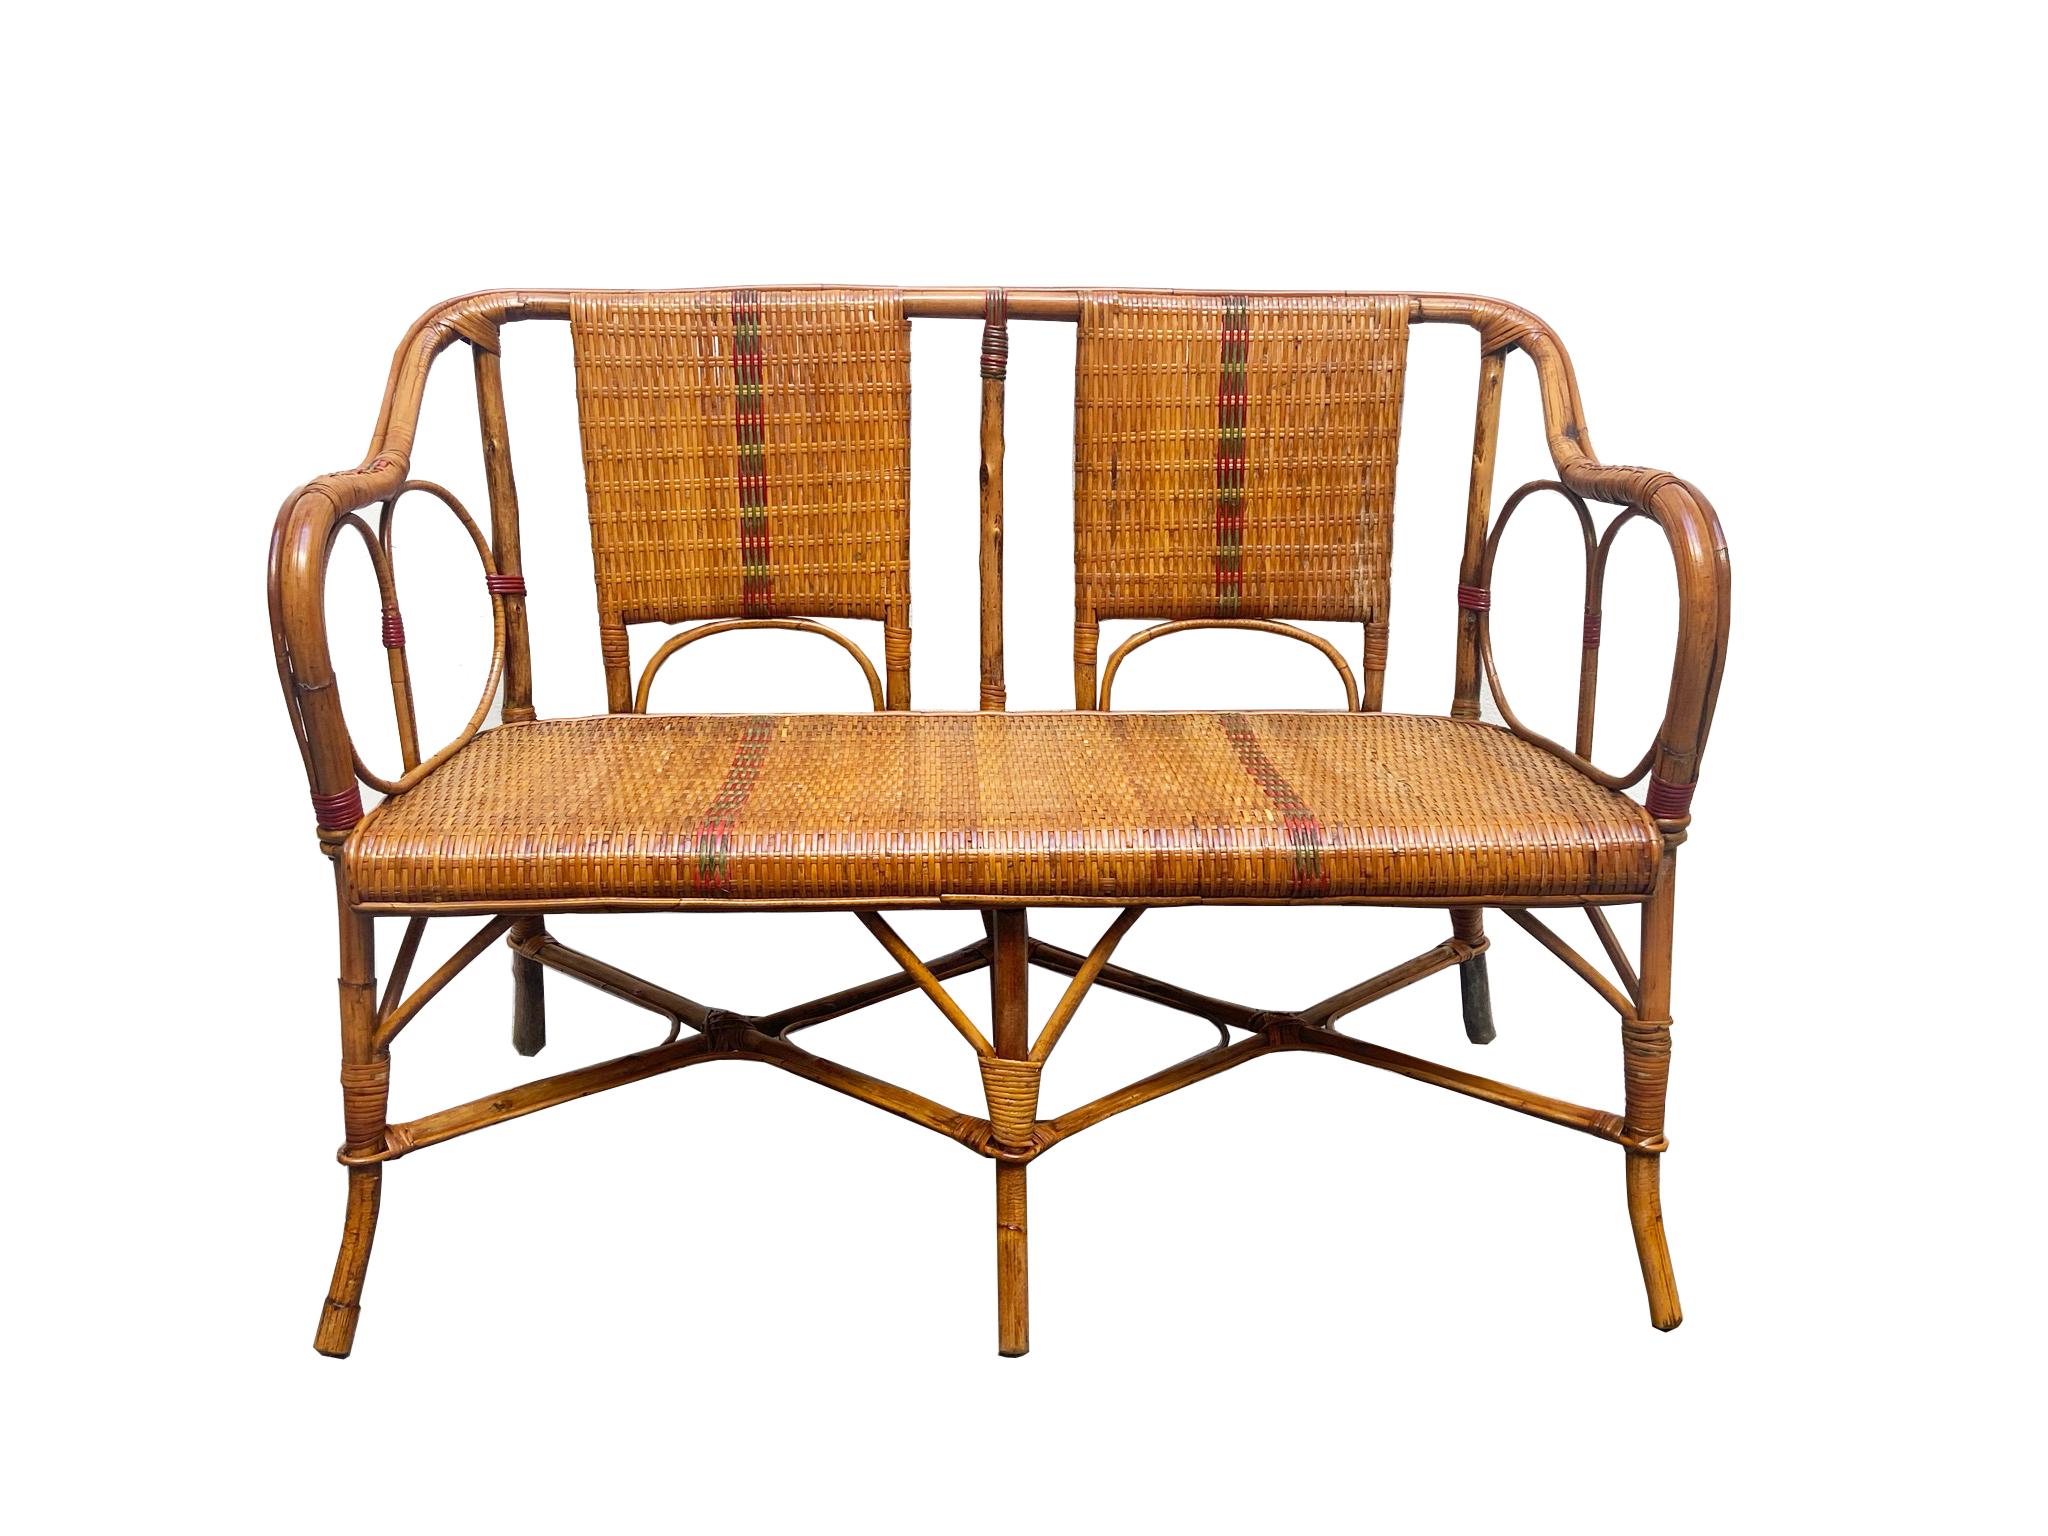 Beautiful set for living room or garden in rattan with colored profiles, Art Deco style of the 50s. The structure is in light brown natural wicker fiber, and inserts in colored plastic. The set consists of a sofa, two armchairs and a delightful